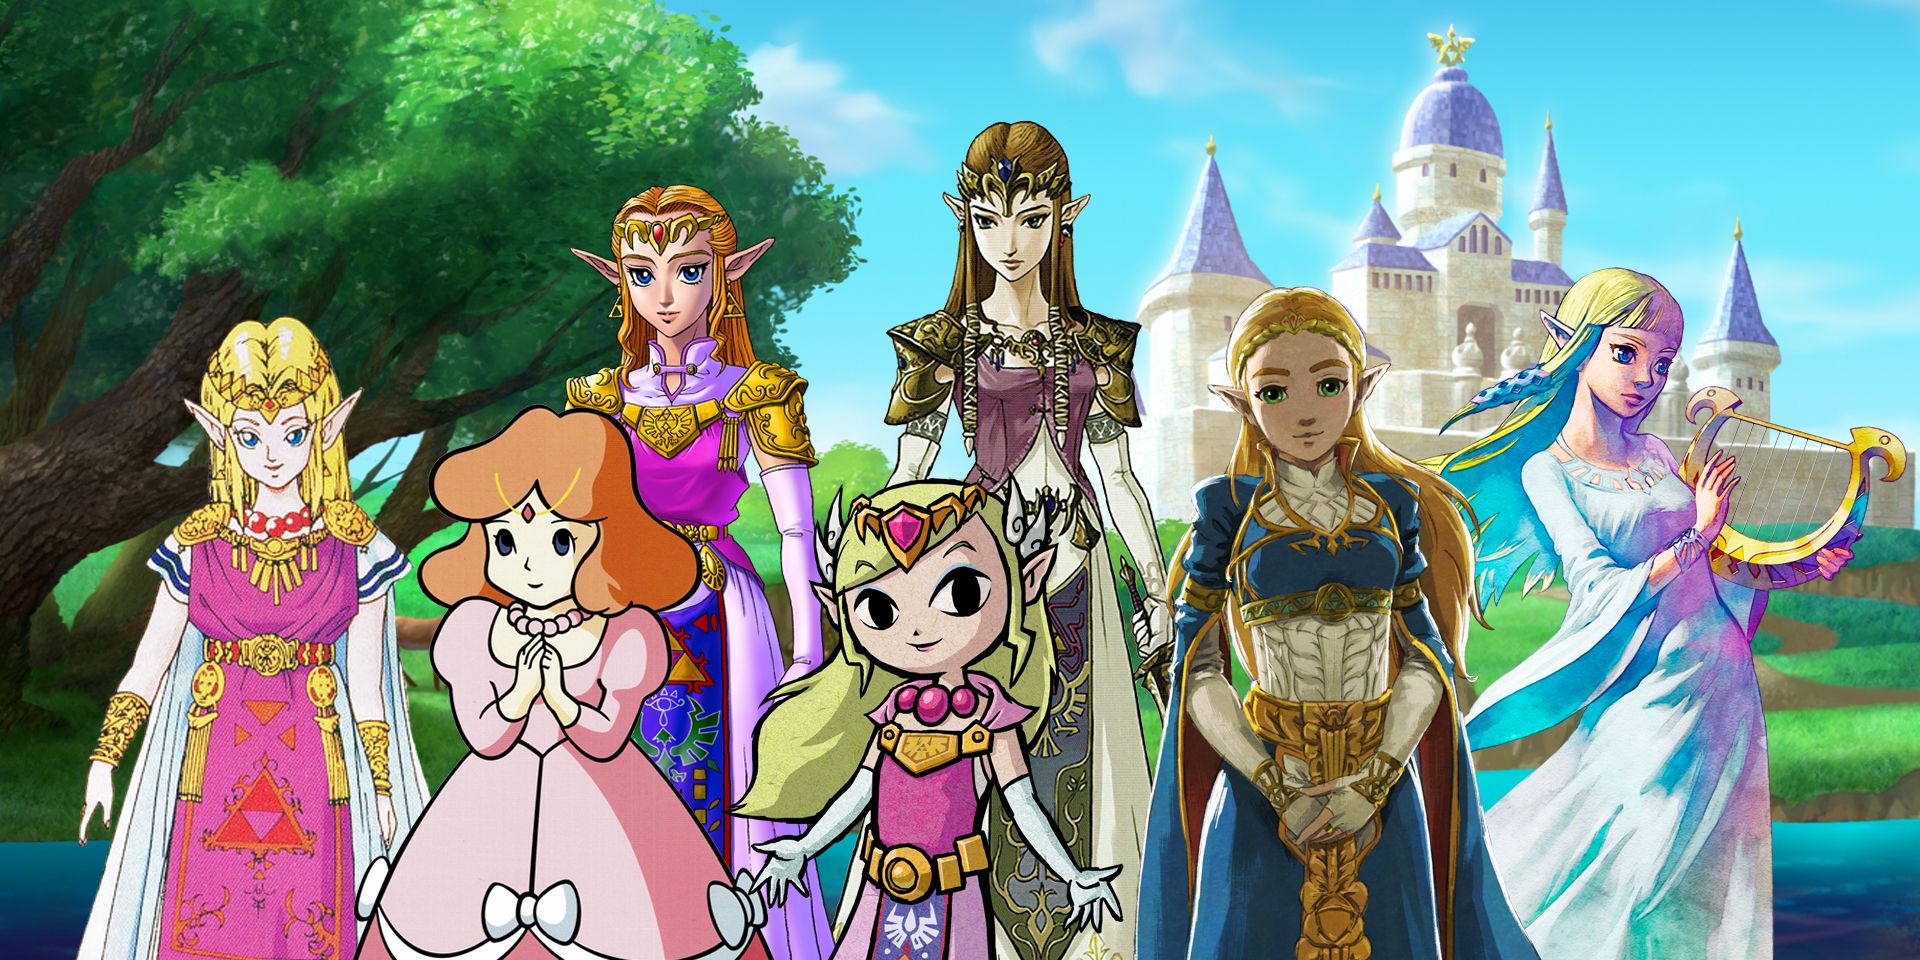 The 15 Best Zelda Games of All Time Ranked